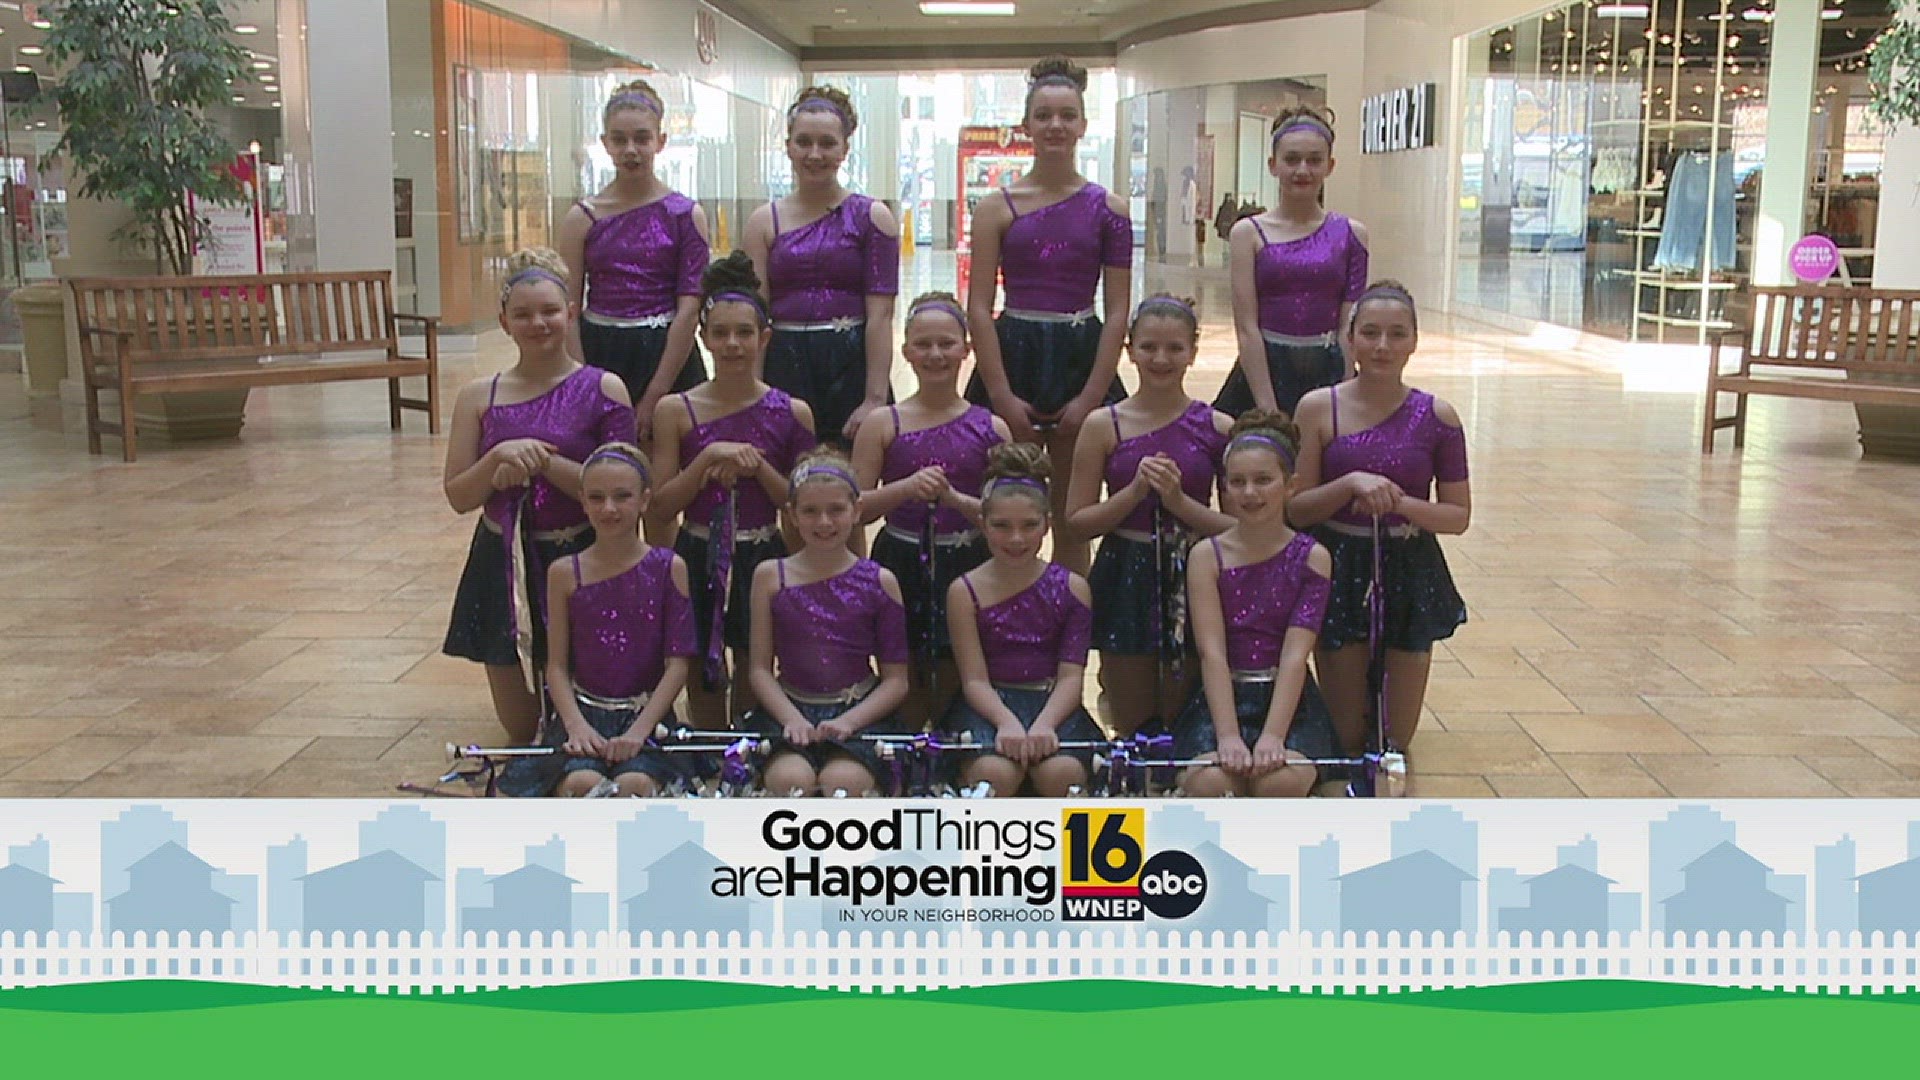 The Double "R" Twirlettes are having their annual Twirl-A-Thon for St. Joseph's Center on Saturday, April 15 from Noon - 2pm at the Viewmont Mall in Scranton